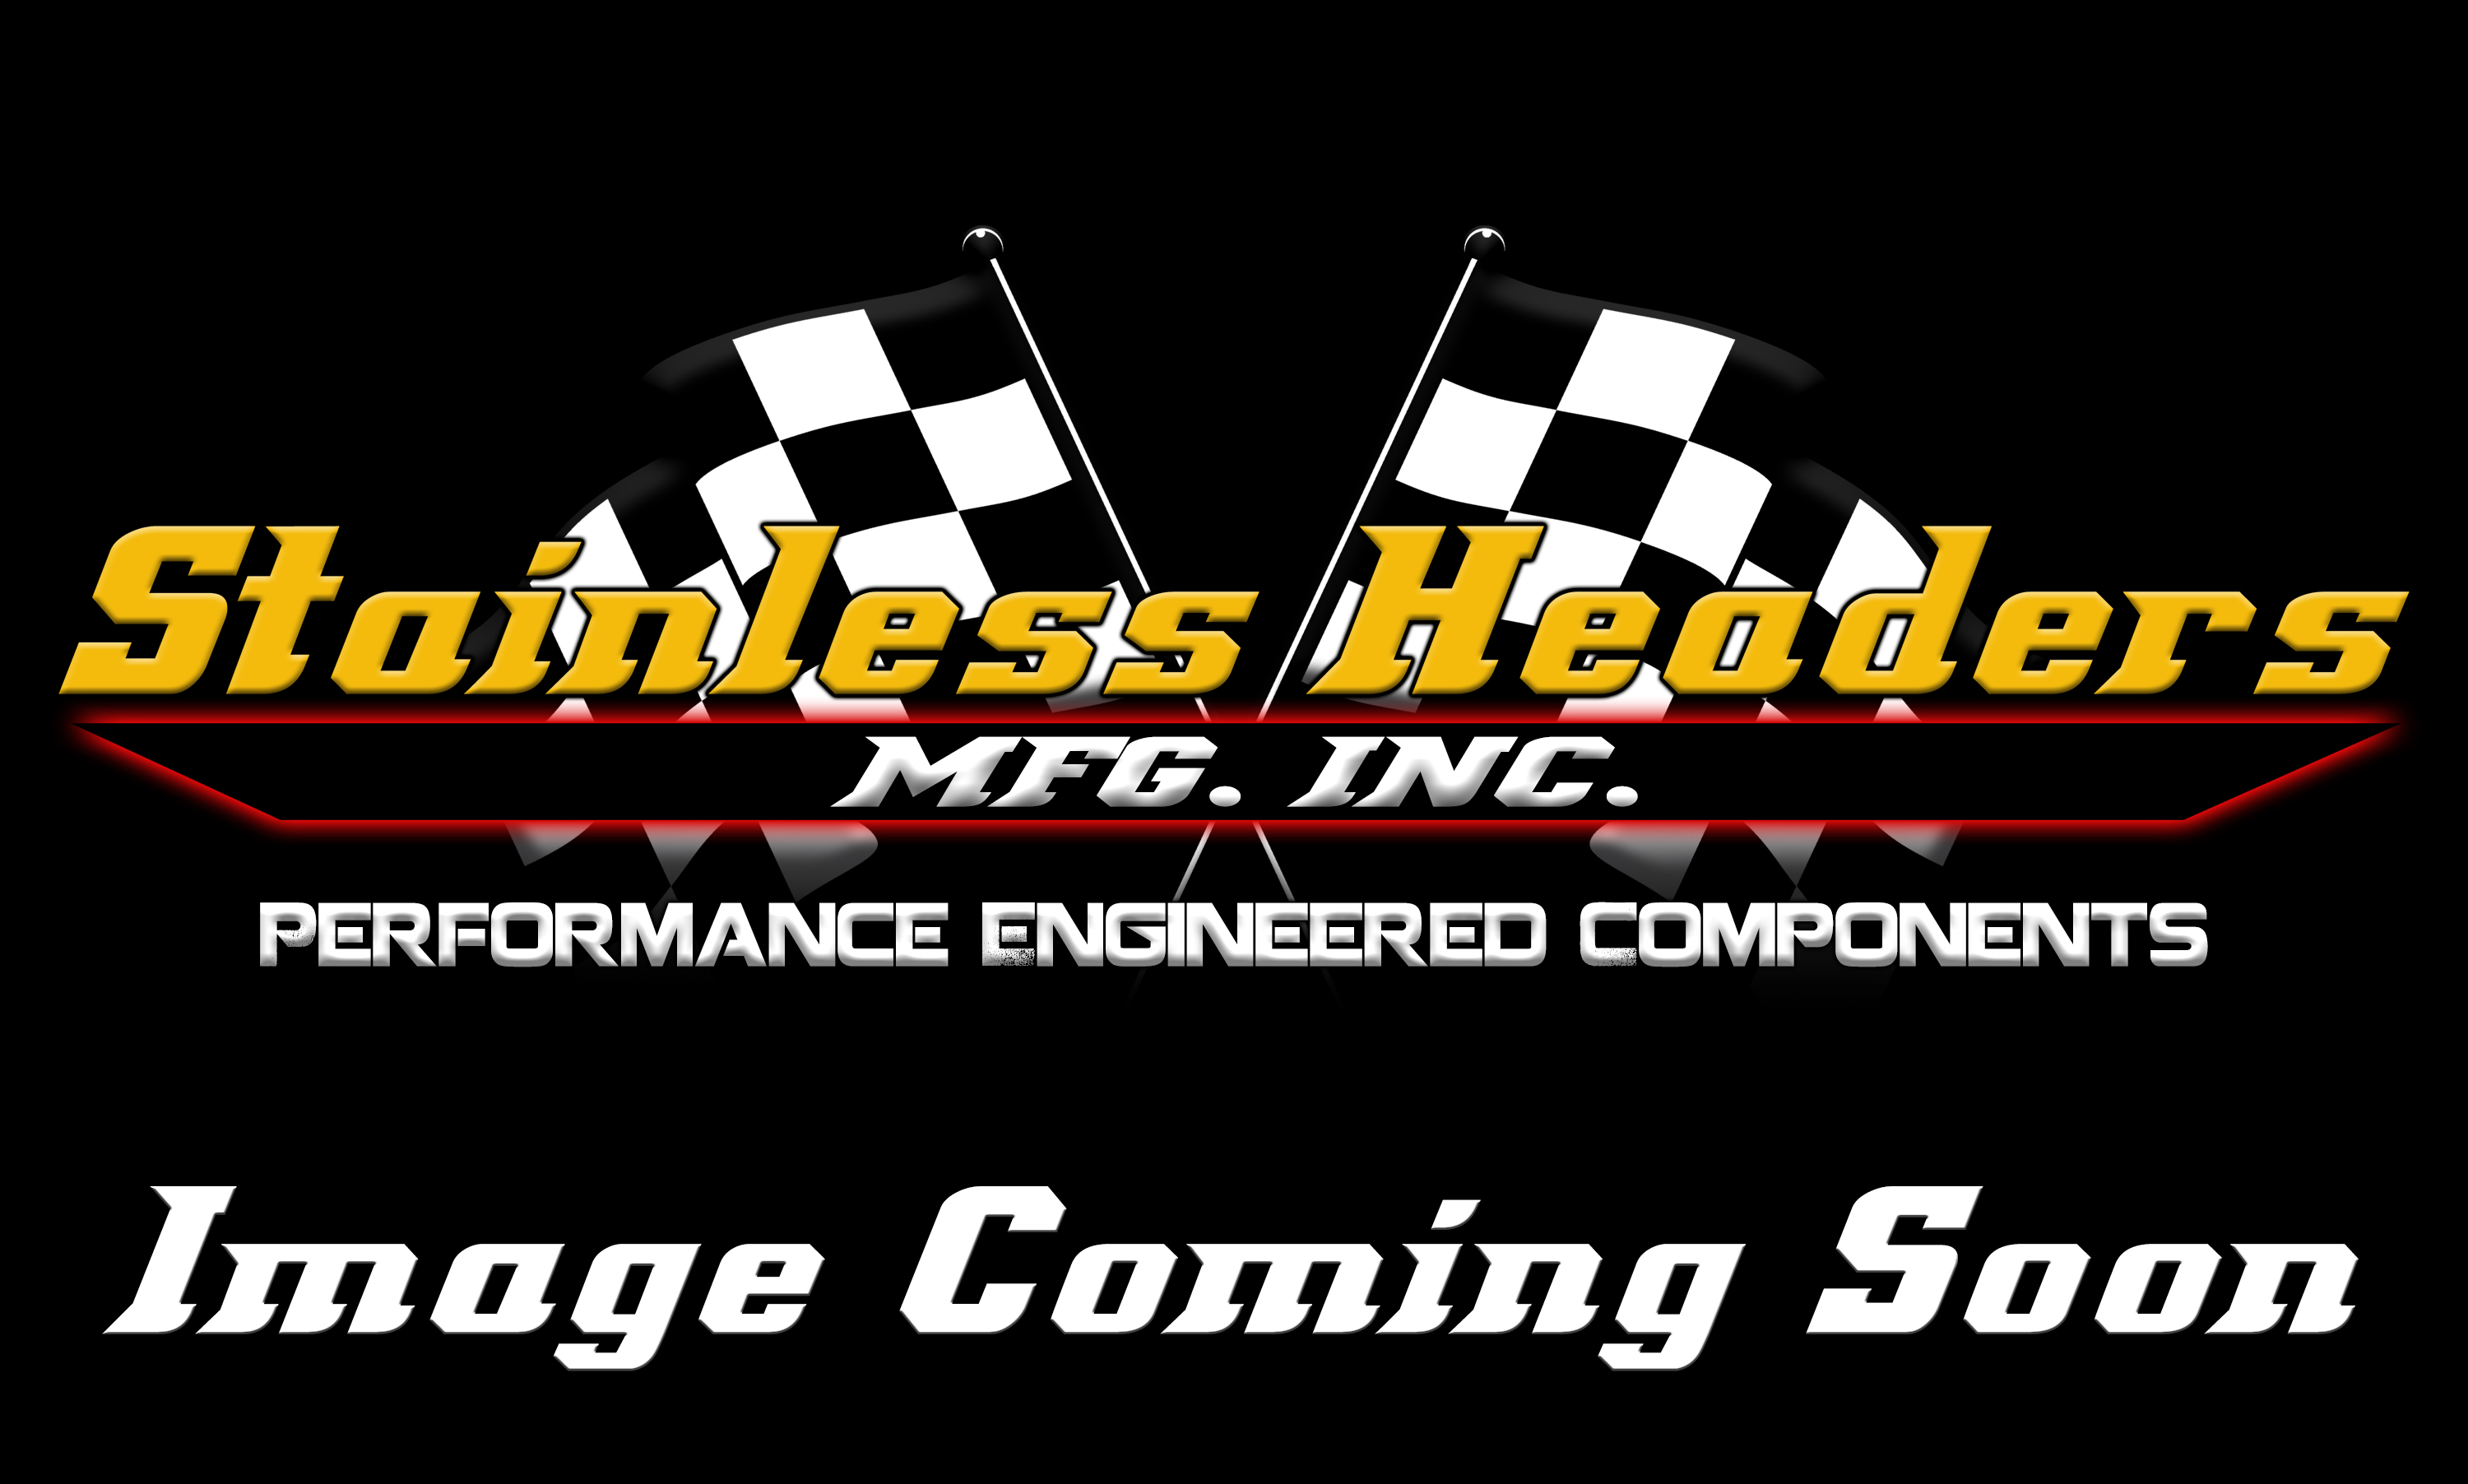 Stainless Headers - 2" Primary 5 into 1 Performance Merge Collector-16ga 321ss